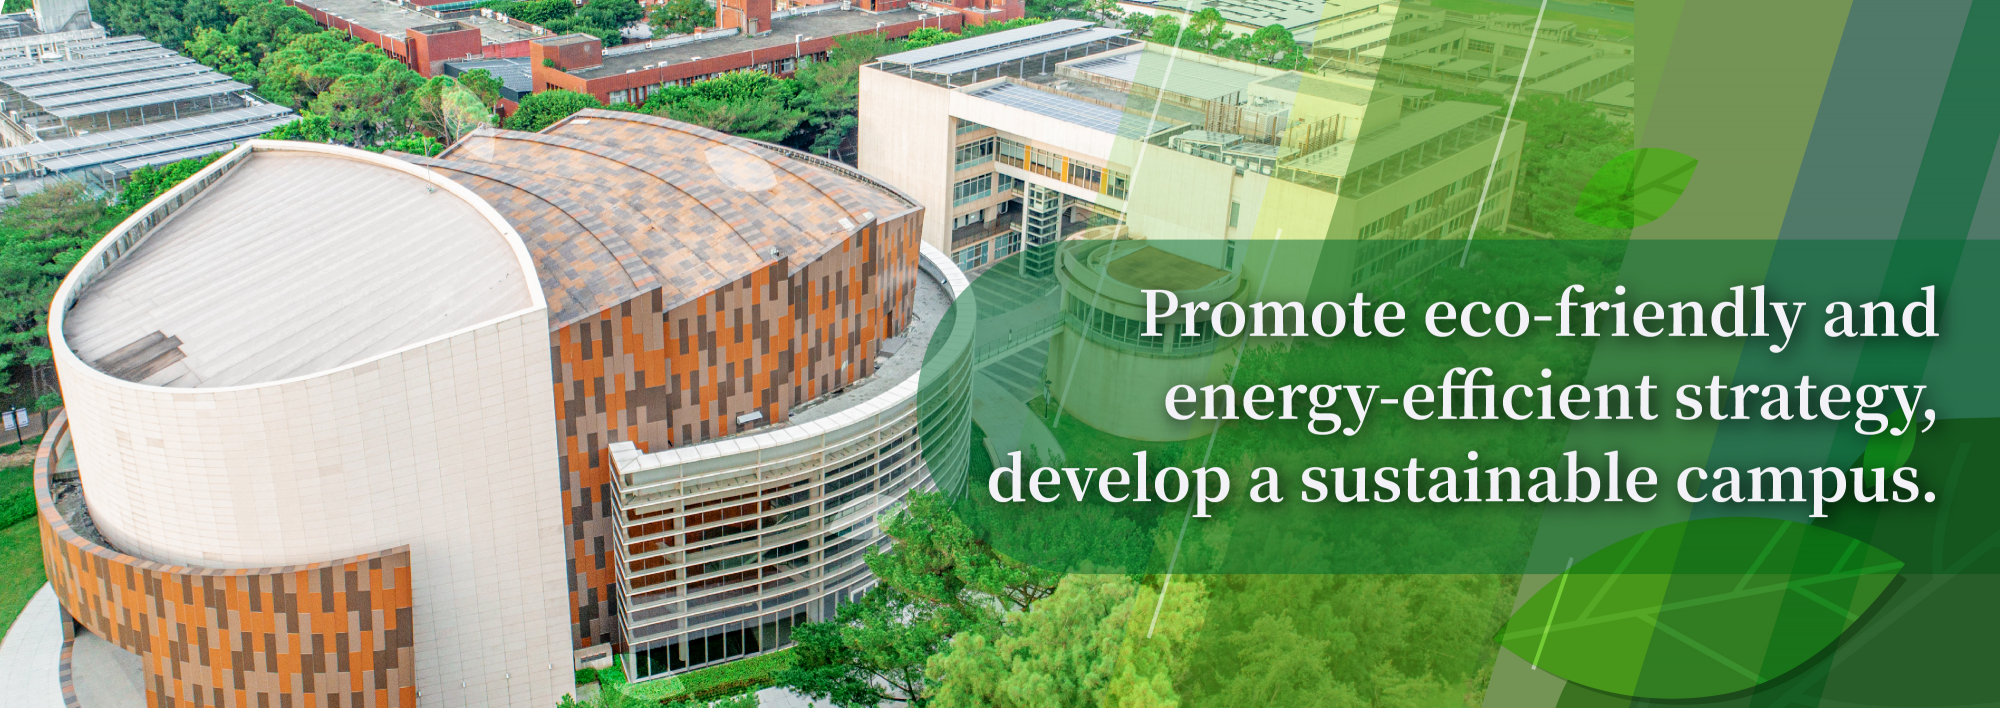 Promote eco-friendly and energy-efficient strategy, develop a sustainable campus.